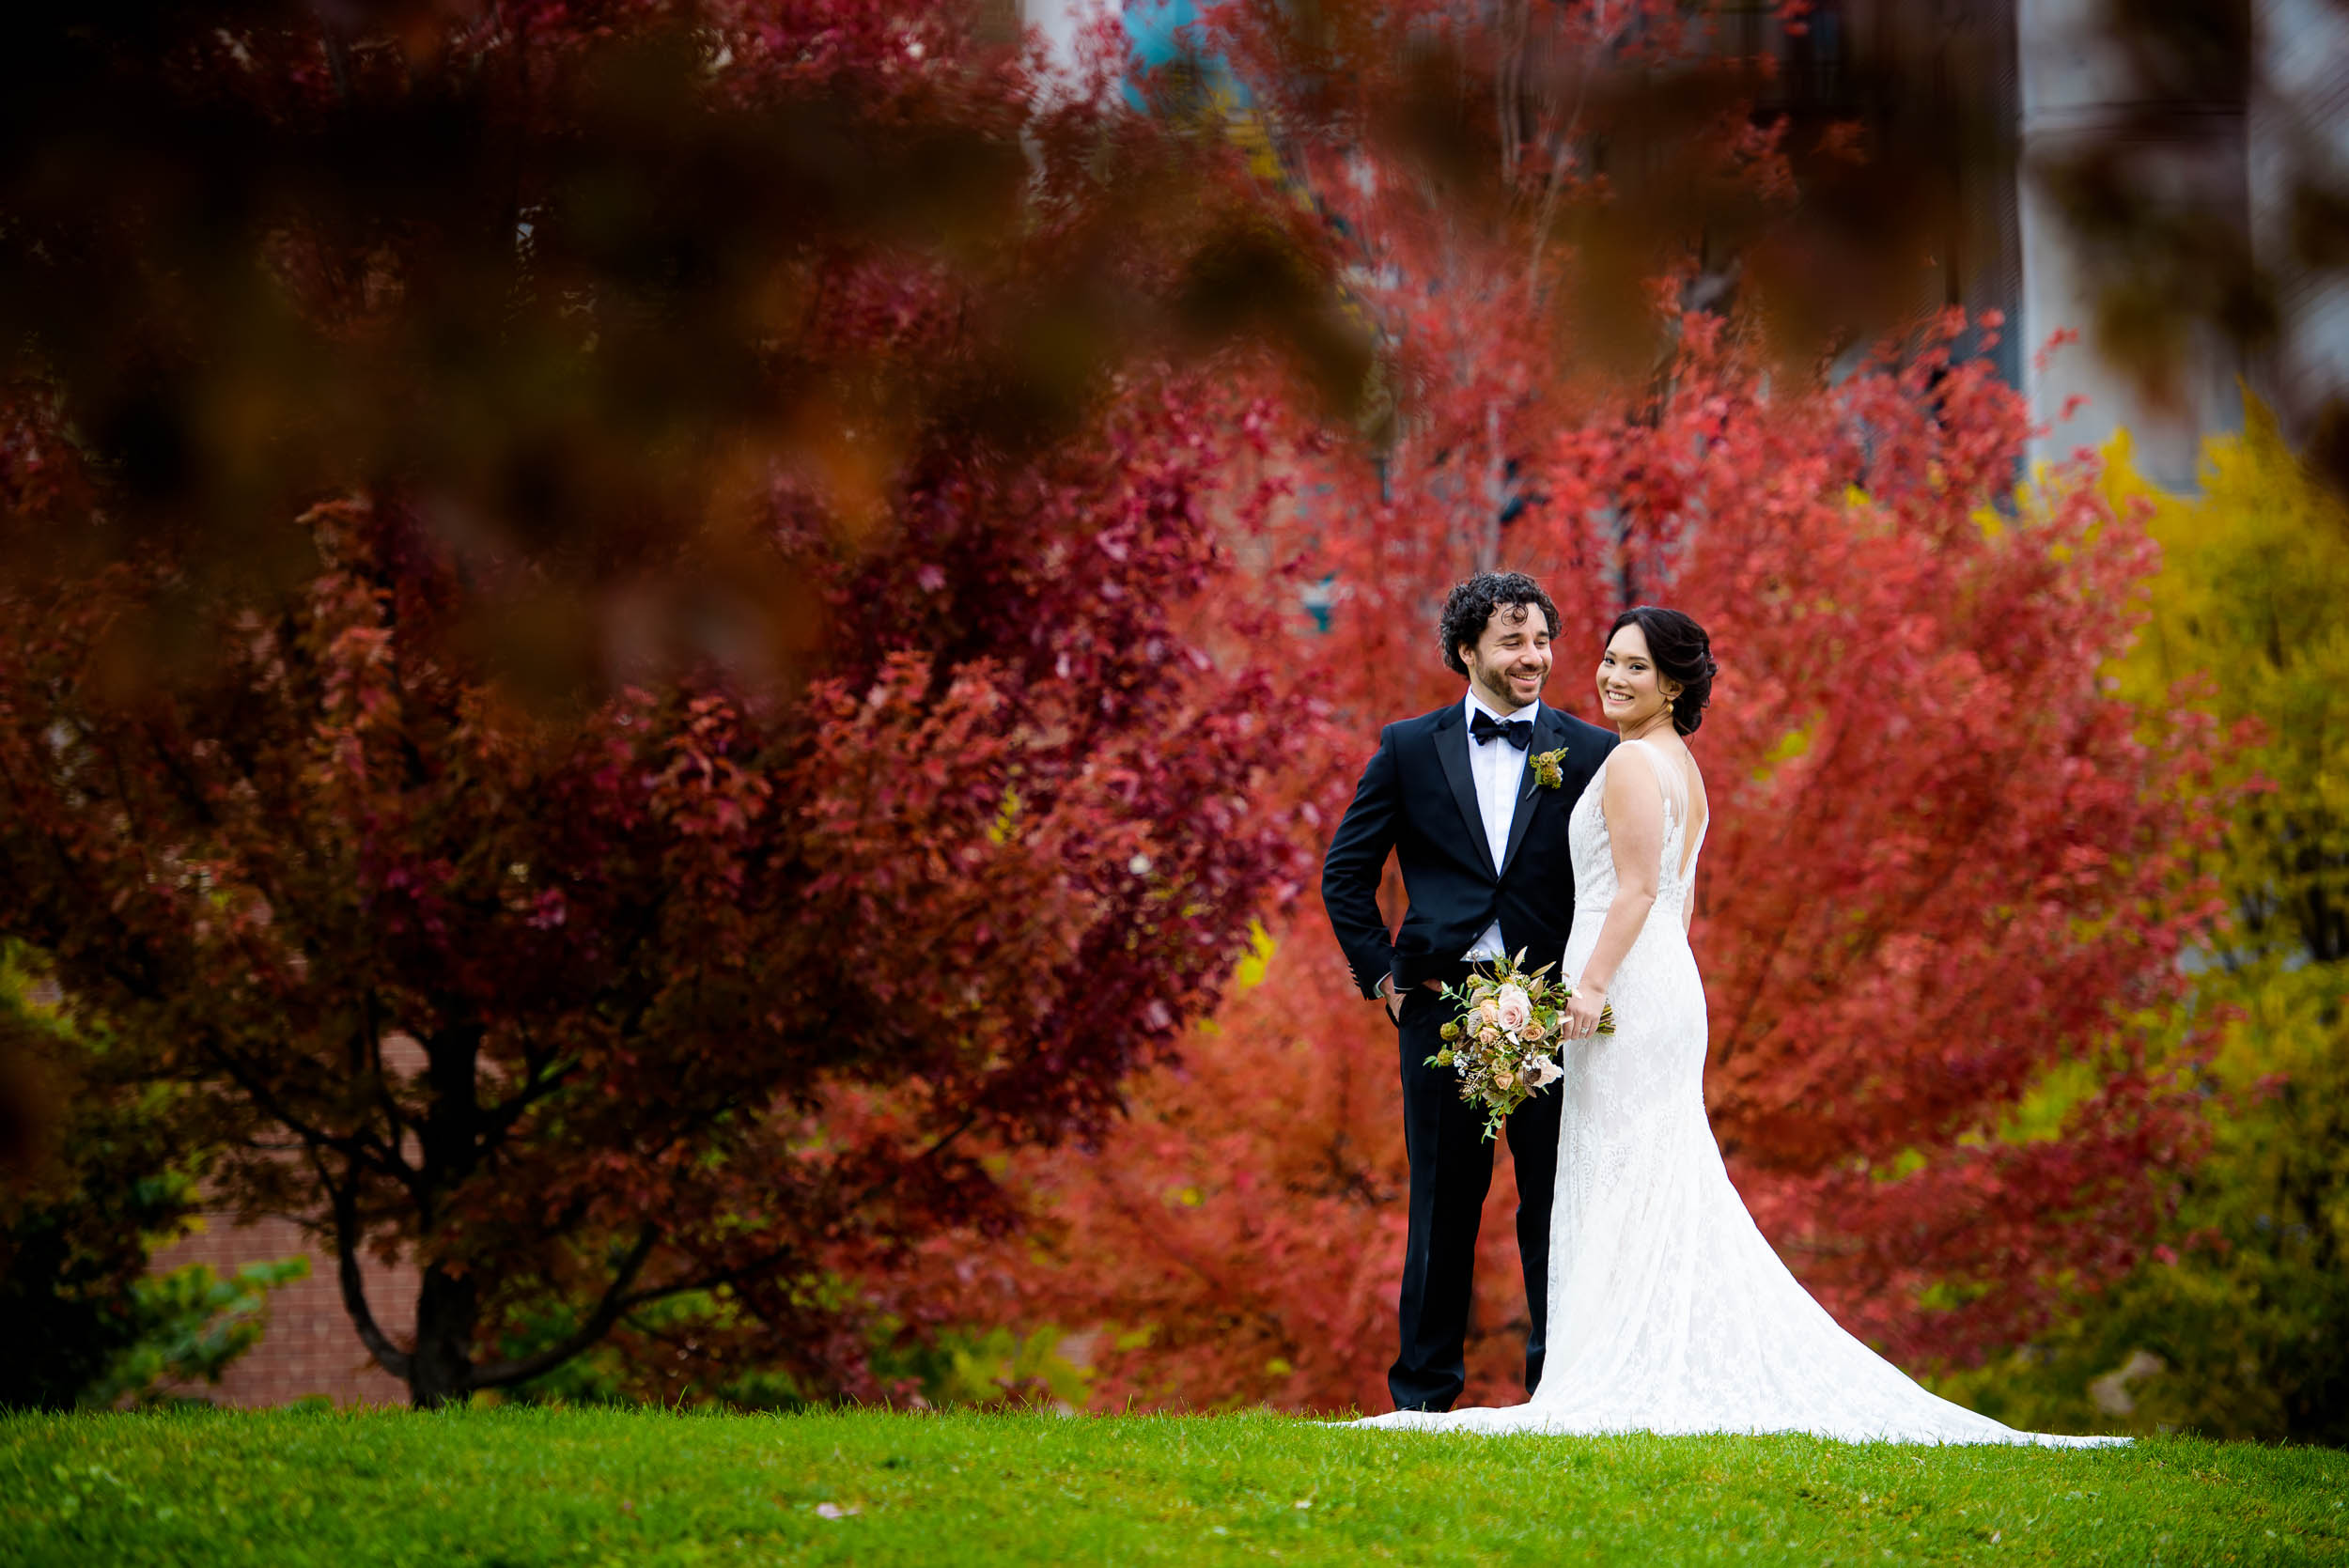 Fall wedding colors portrait at Mary Bartelme Park Chicago.